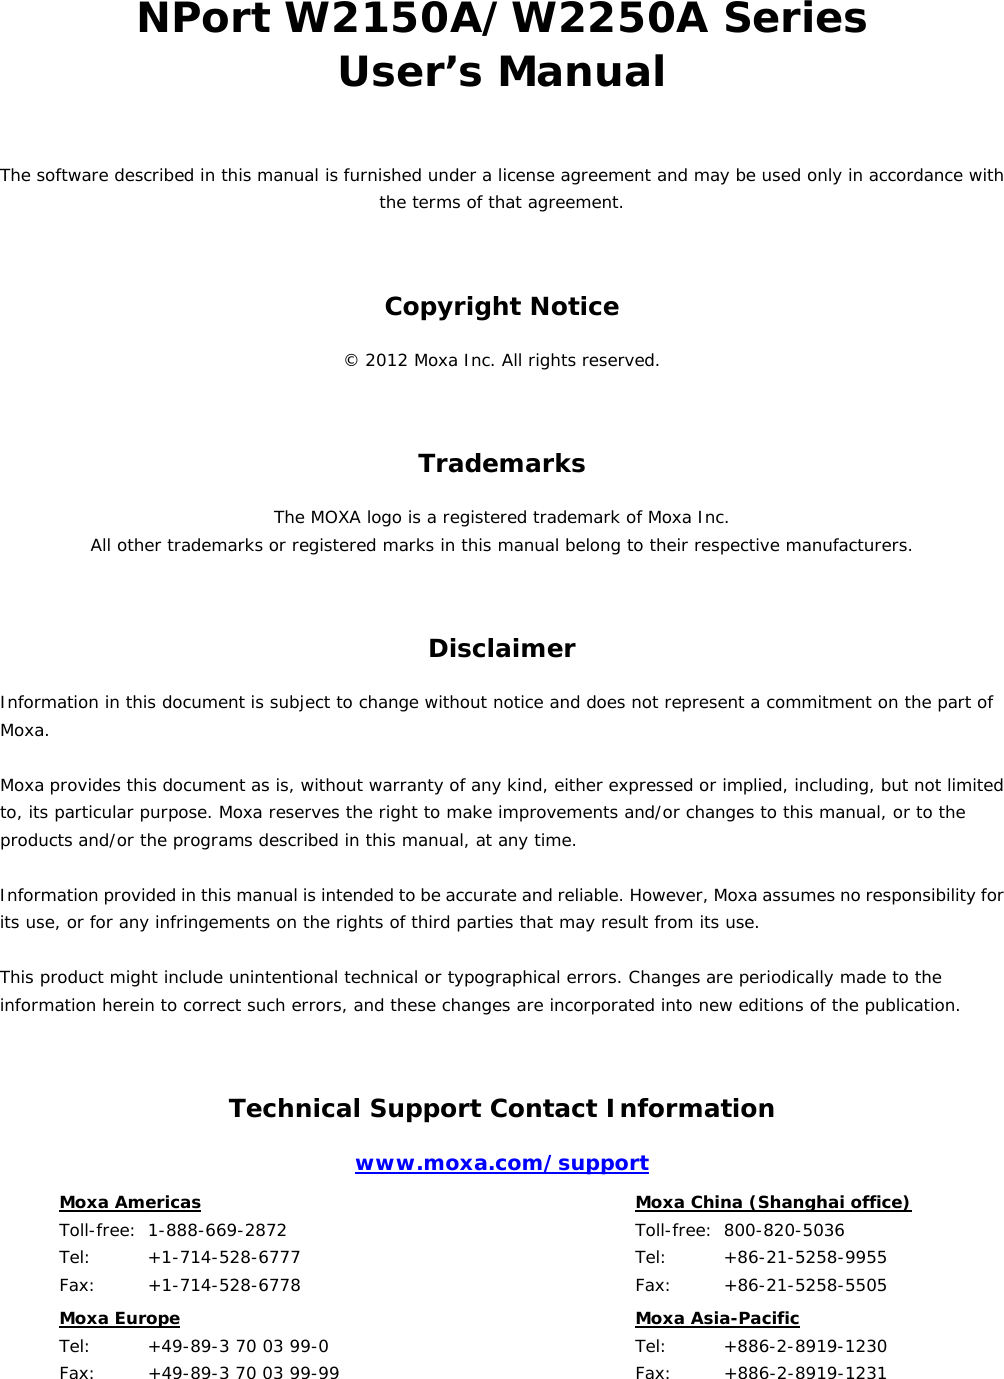 NPort W2150A/W2250A Series User’s Manual The software described in this manual is furnished under a license agreement and may be used only in accordance with the terms of that agreement. Copyright Notice © 2012 Moxa Inc. All rights reserved. Trademarks The MOXA logo is a registered trademark of Moxa Inc. All other trademarks or registered marks in this manual belong to their respective manufacturers. Disclaimer Information in this document is subject to change without notice and does not represent a commitment on the part of Moxa.  Moxa provides this document as is, without warranty of any kind, either expressed or implied, including, but not limited to, its particular purpose. Moxa reserves the right to make improvements and/or changes to this manual, or to the products and/or the programs described in this manual, at any time.  Information provided in this manual is intended to be accurate and reliable. However, Moxa assumes no responsibility for its use, or for any infringements on the rights of third parties that may result from its use.  This product might include unintentional technical or typographical errors. Changes are periodically made to the information herein to correct such errors, and these changes are incorporated into new editions of the publication. Technical Support Contact Information www.moxa.com/support Moxa Americas  Toll-free:  1-888-669-2872 Tel:    +1-714-528-6777 Fax:   +1-714-528-6778  Moxa China (Shanghai office)  Toll-free: 800-820-5036 Tel:    +86-21-5258-9955 Fax:   +86-21-5258-5505 Moxa Europe  Tel:    +49-89-3 70 03 99-0 Fax:   +49-89-3 70 03 99-99  Moxa Asia-Pacific  Tel:    +886-2-8919-1230 Fax:   +886-2-8919-1231     